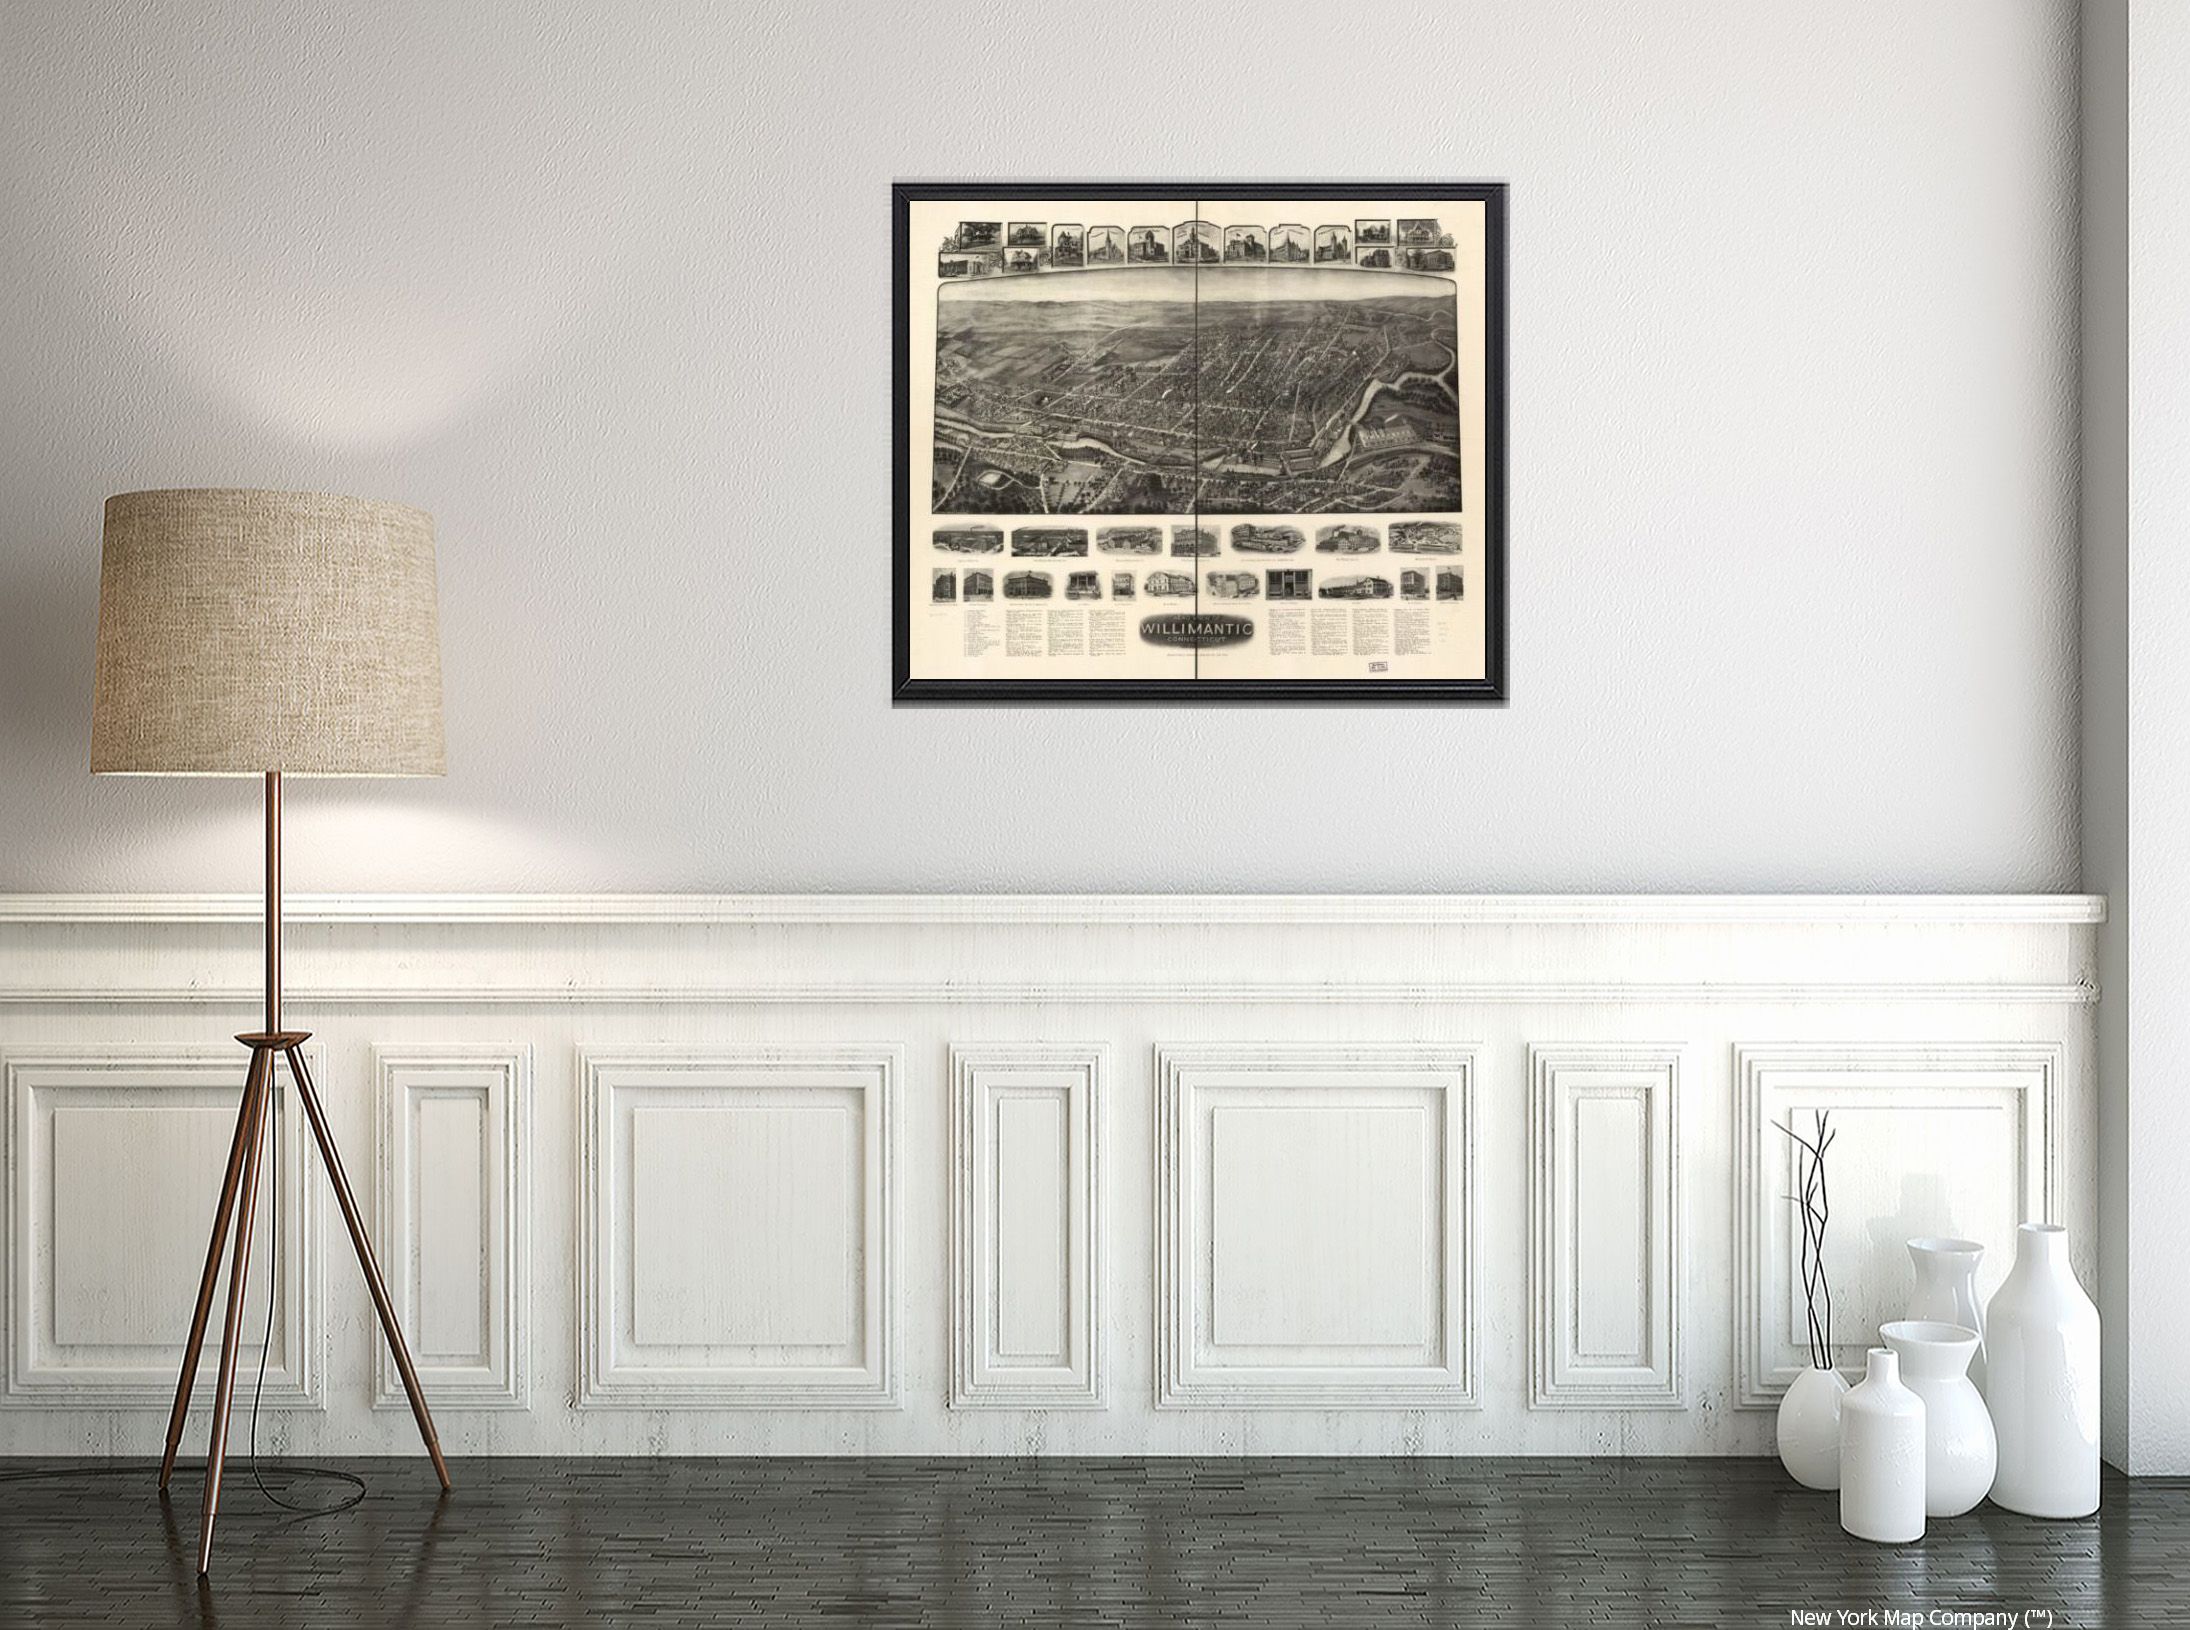 MAPS OF THE PAST Historical Map of Willimantic Connecticut Bailey  1909-23.00 in x 26.97 in Matte Canvas 並行輸入